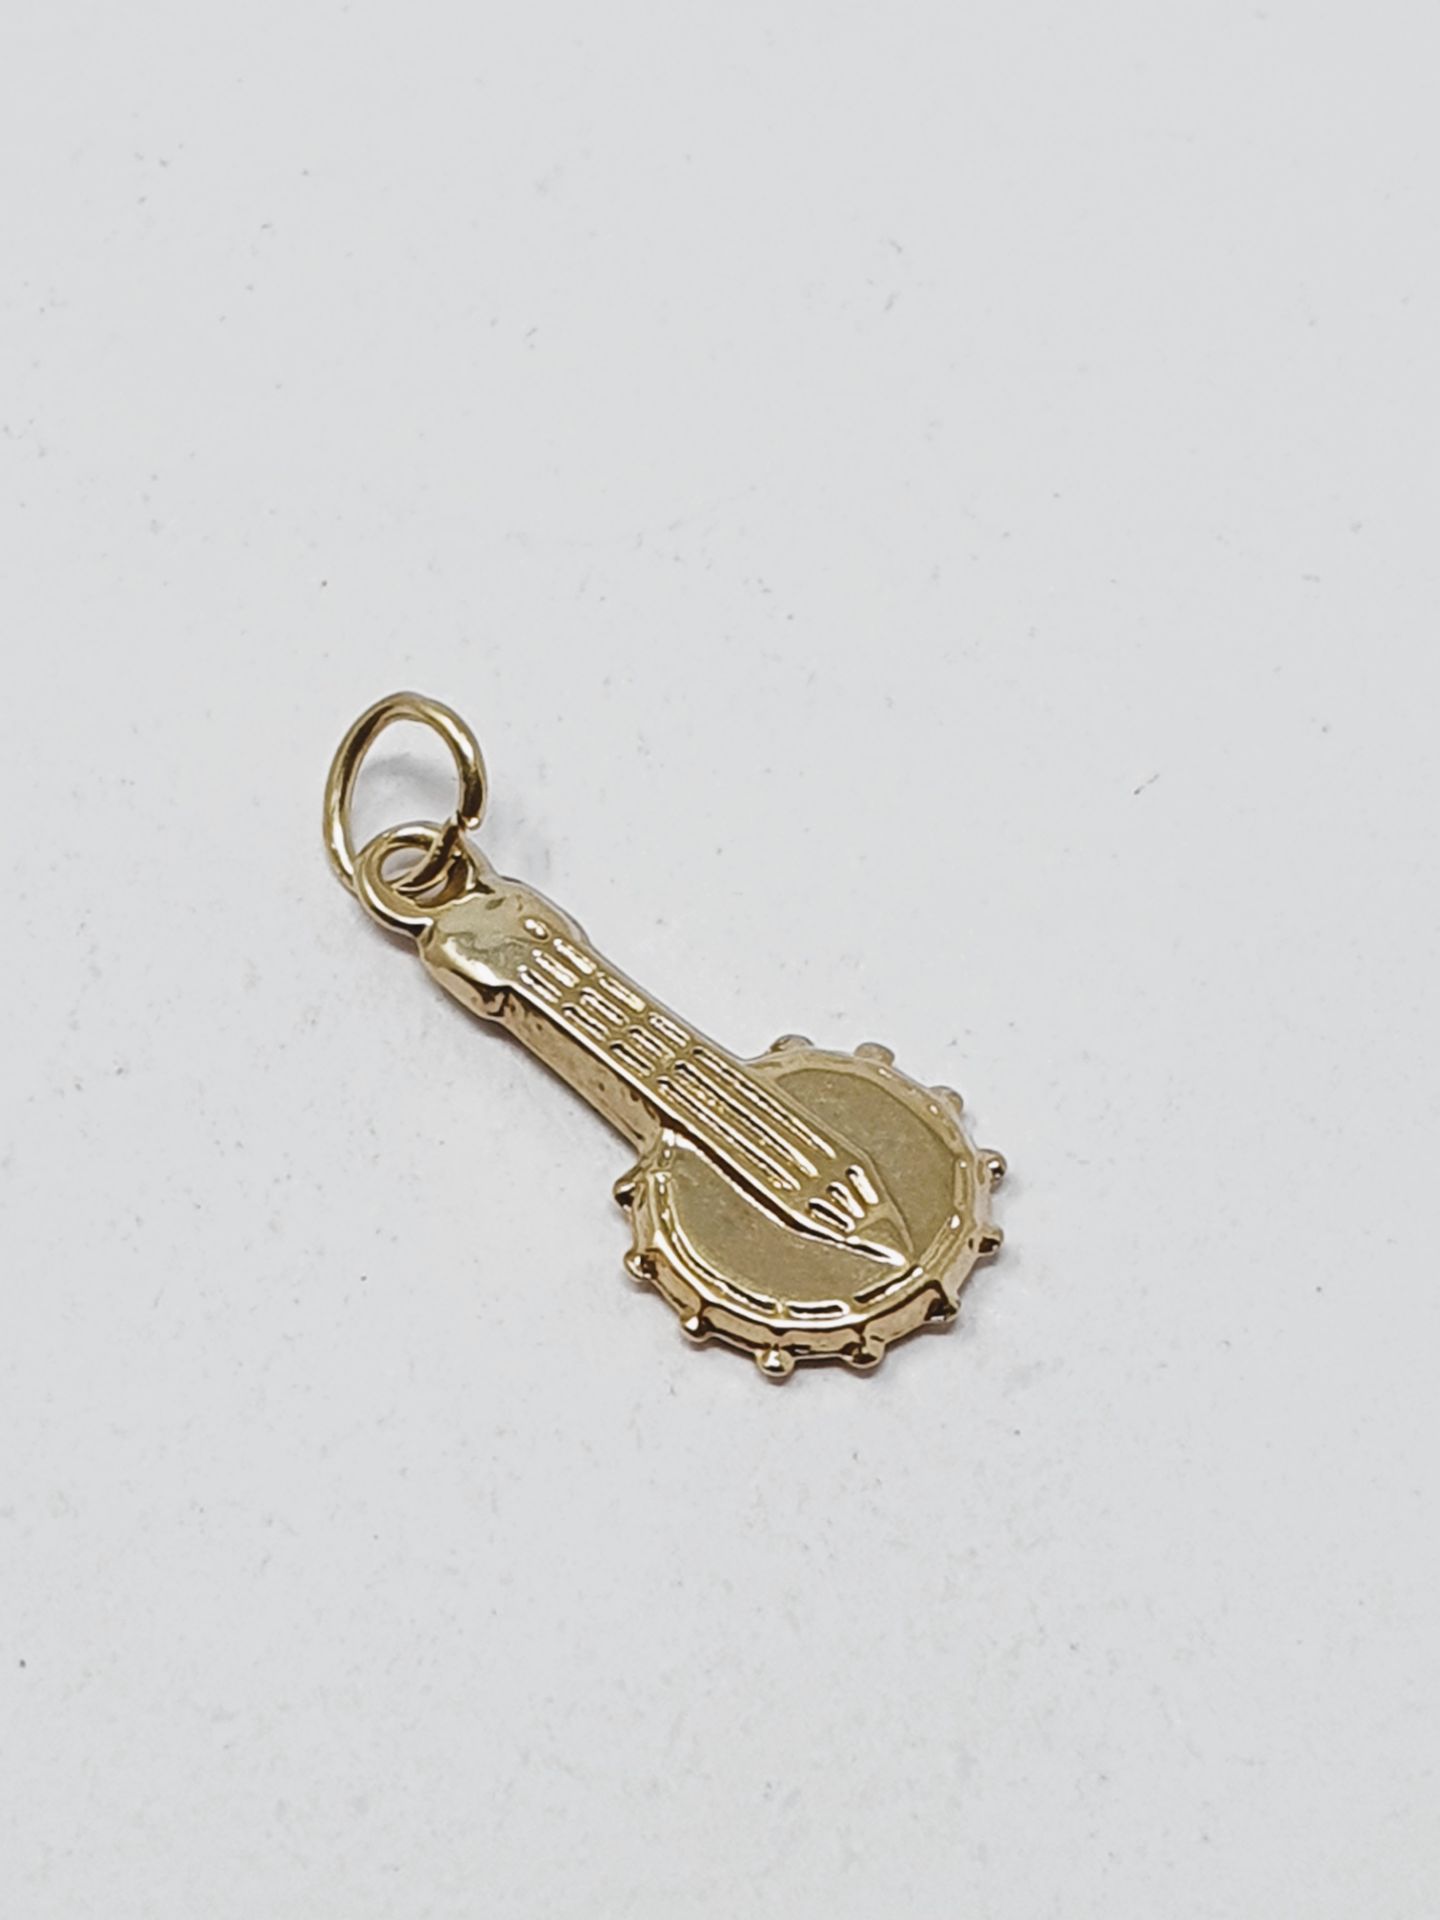 9ct gold vintage banjo charm, gross weight 0.